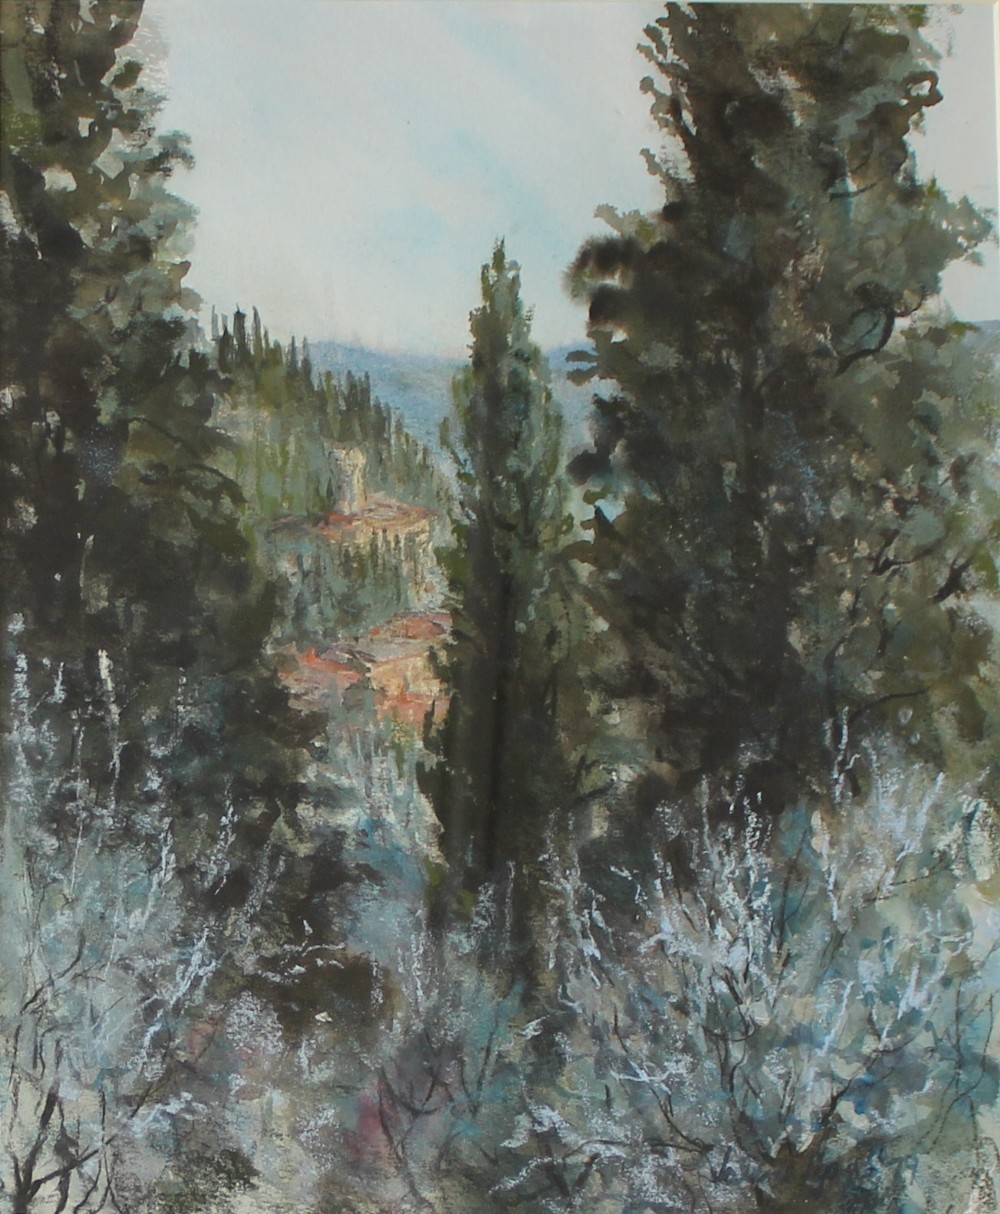 Valerie Ganz
A continental landscape scene
Pastels
Signed and dated '79
46 x 38cm

***ARTISTS